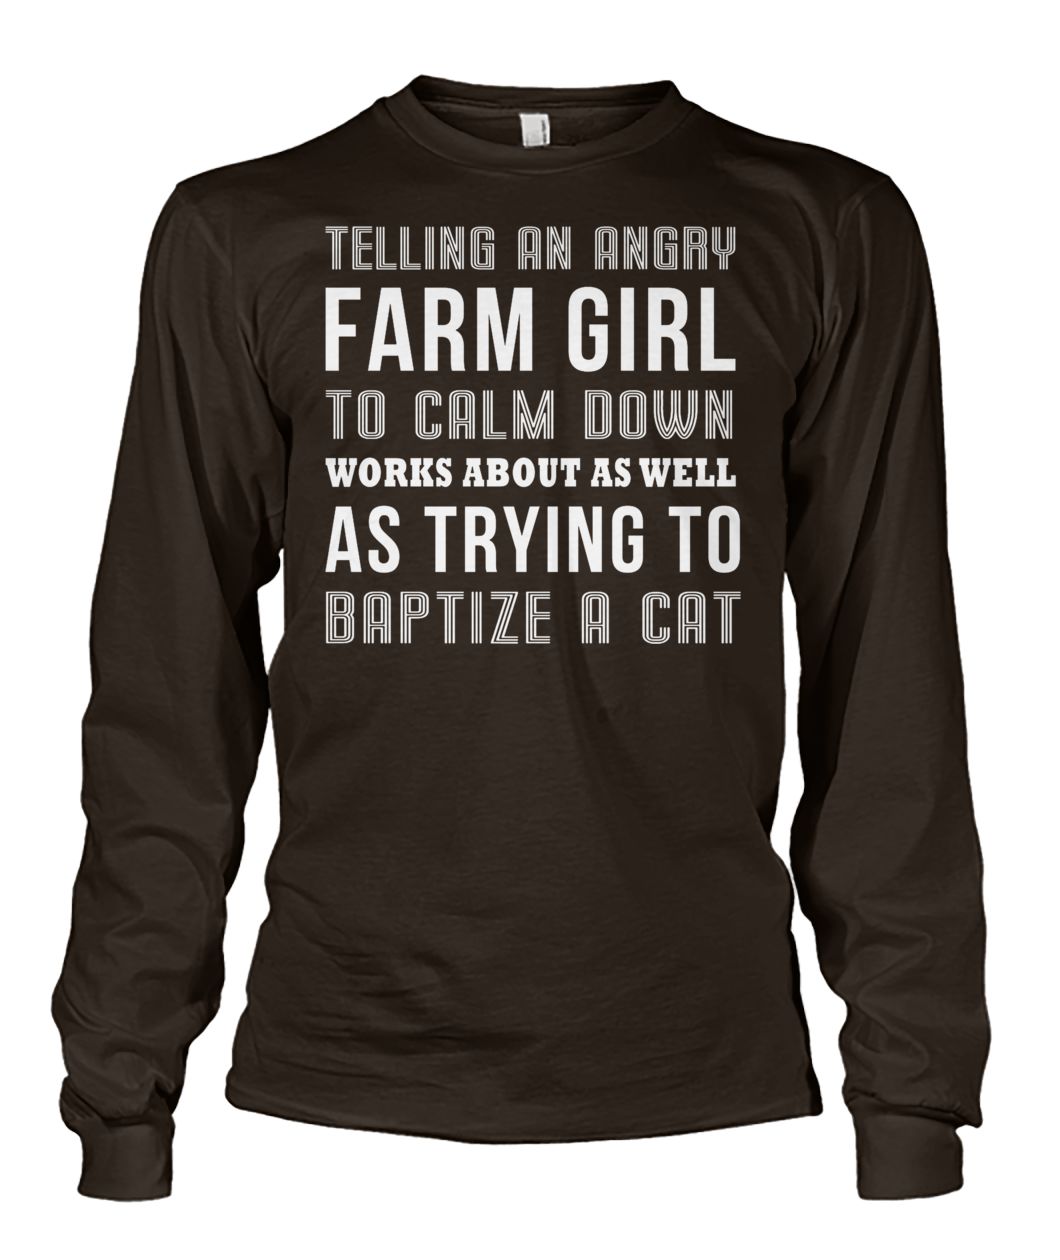 Telling an angry farm girl to calm down works about as well as trying to baptize a cat unisex long sleeve